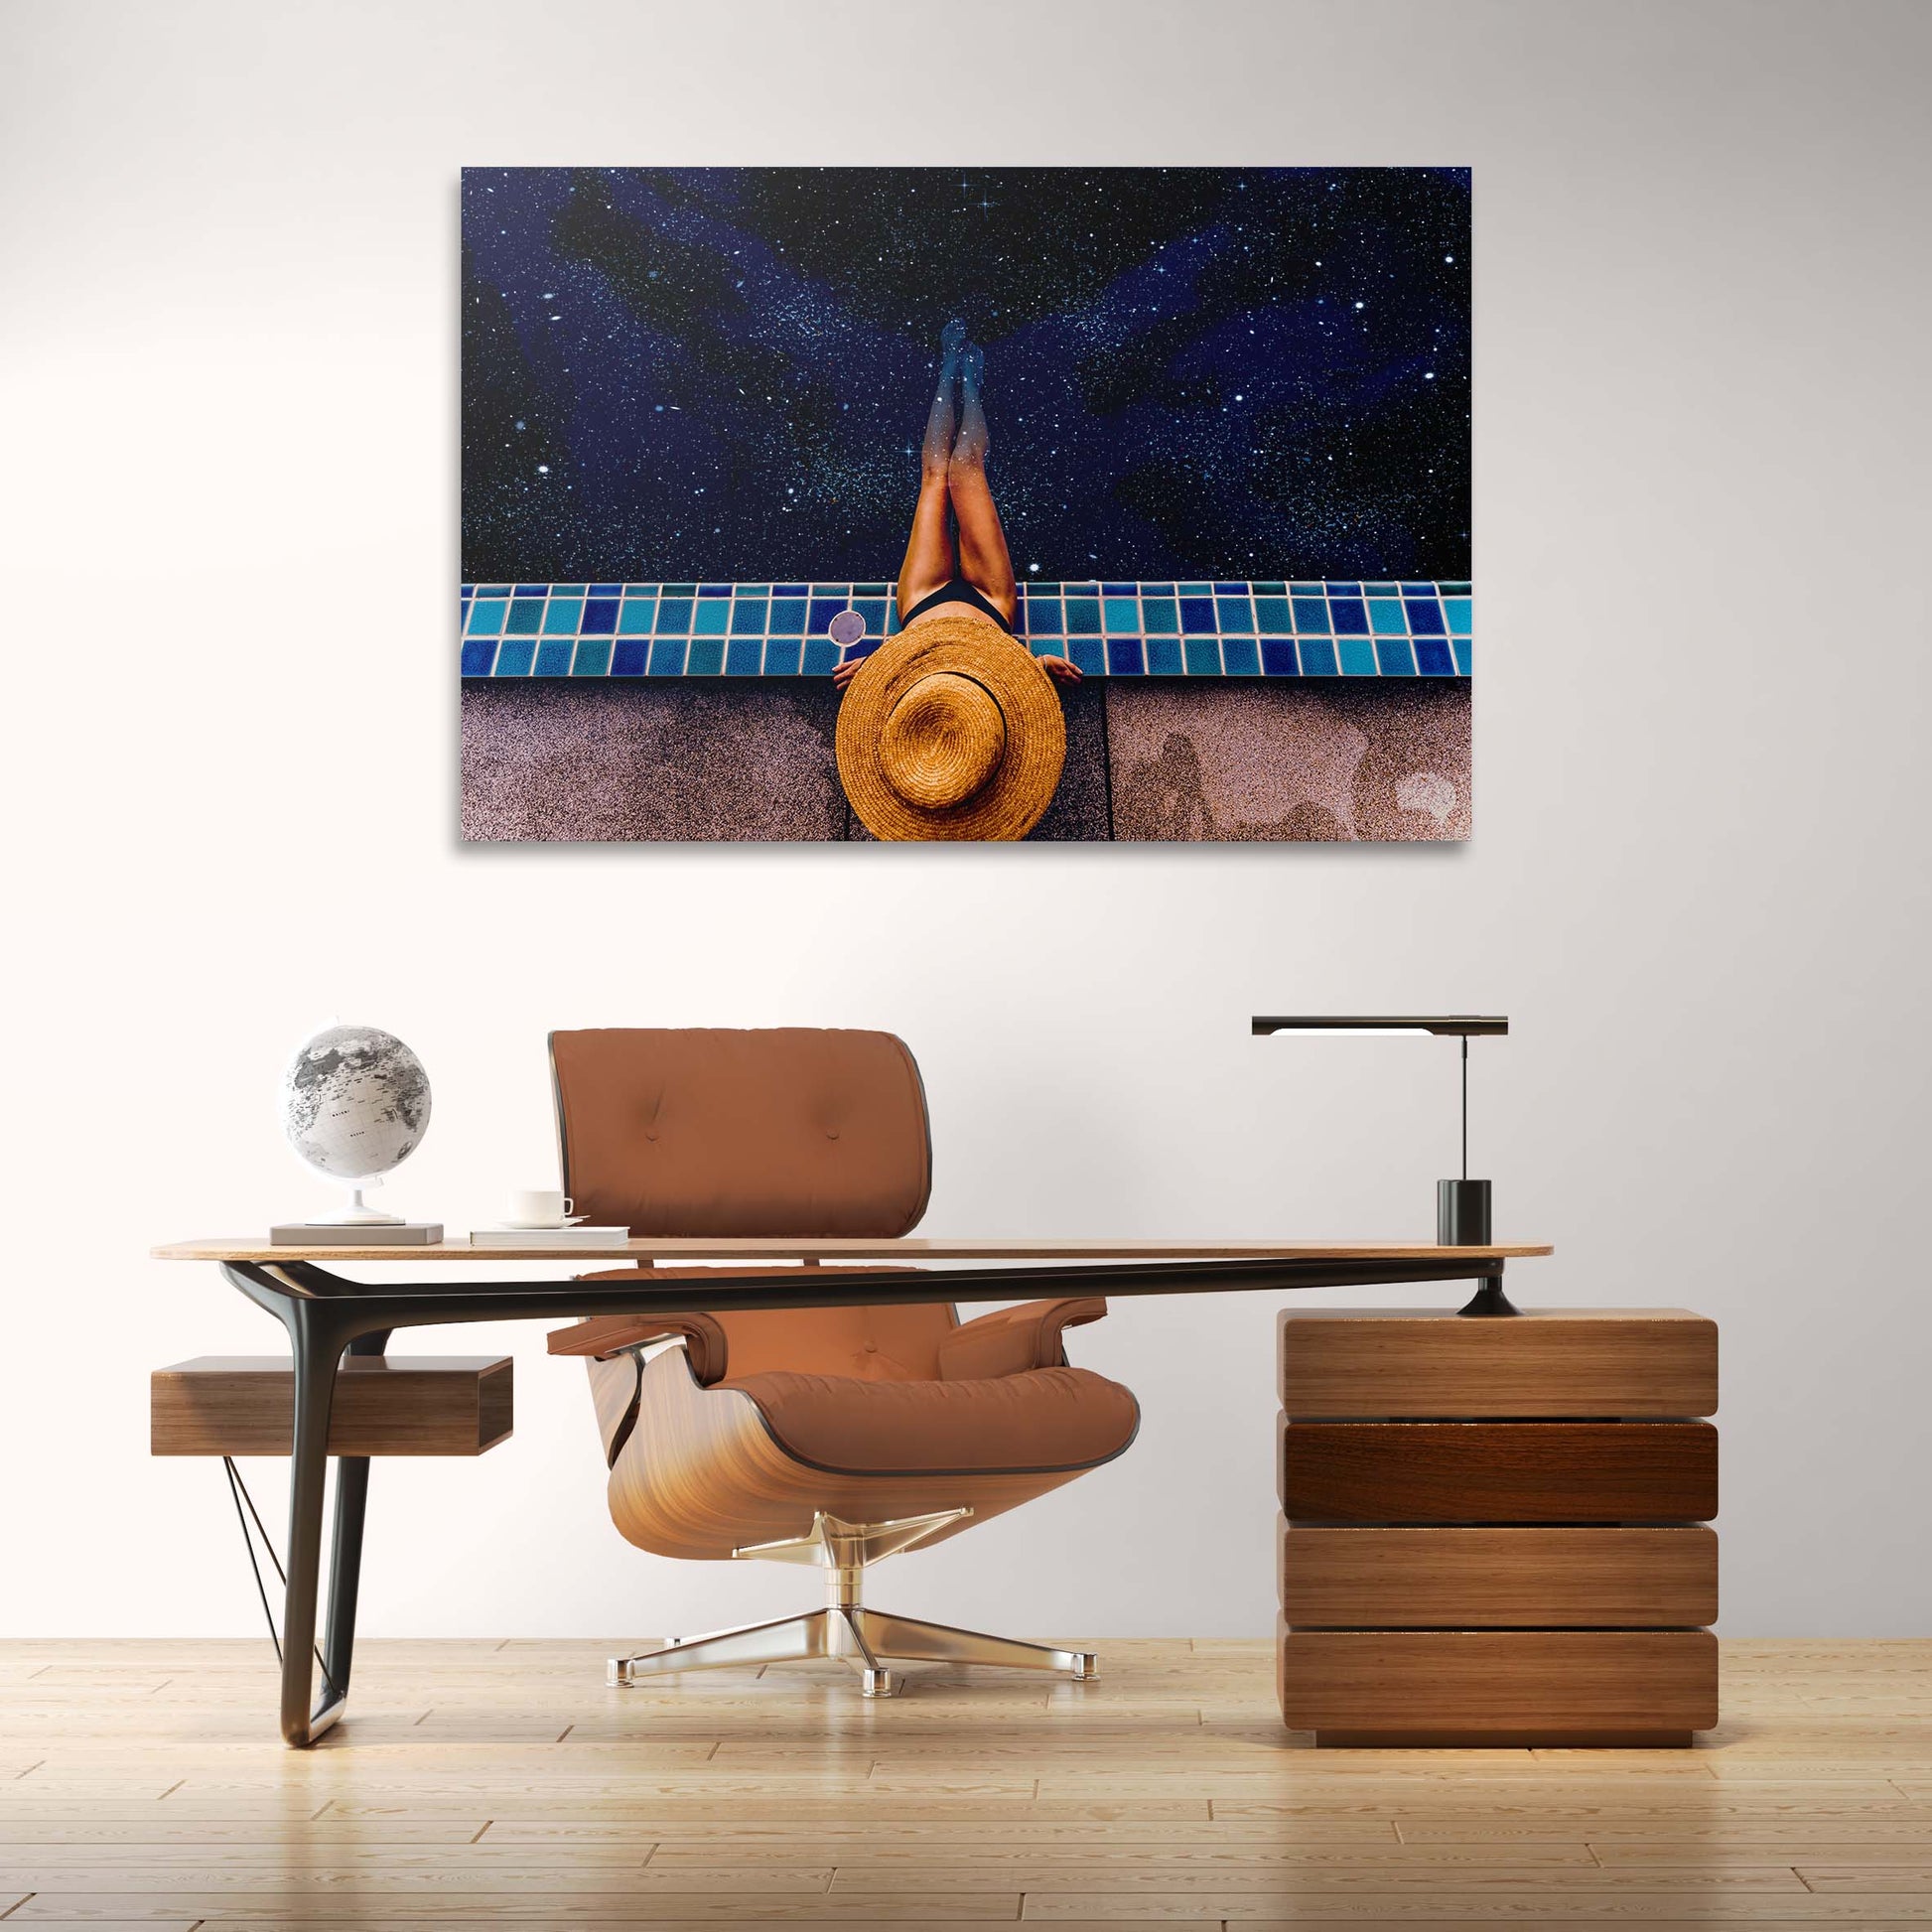 Meant To Be Star Pool Wall Art | Inspirational Wall Art Motivational Wall Art Quotes Office Art | ImpaktMaker Exclusive Canvas Art Landscape